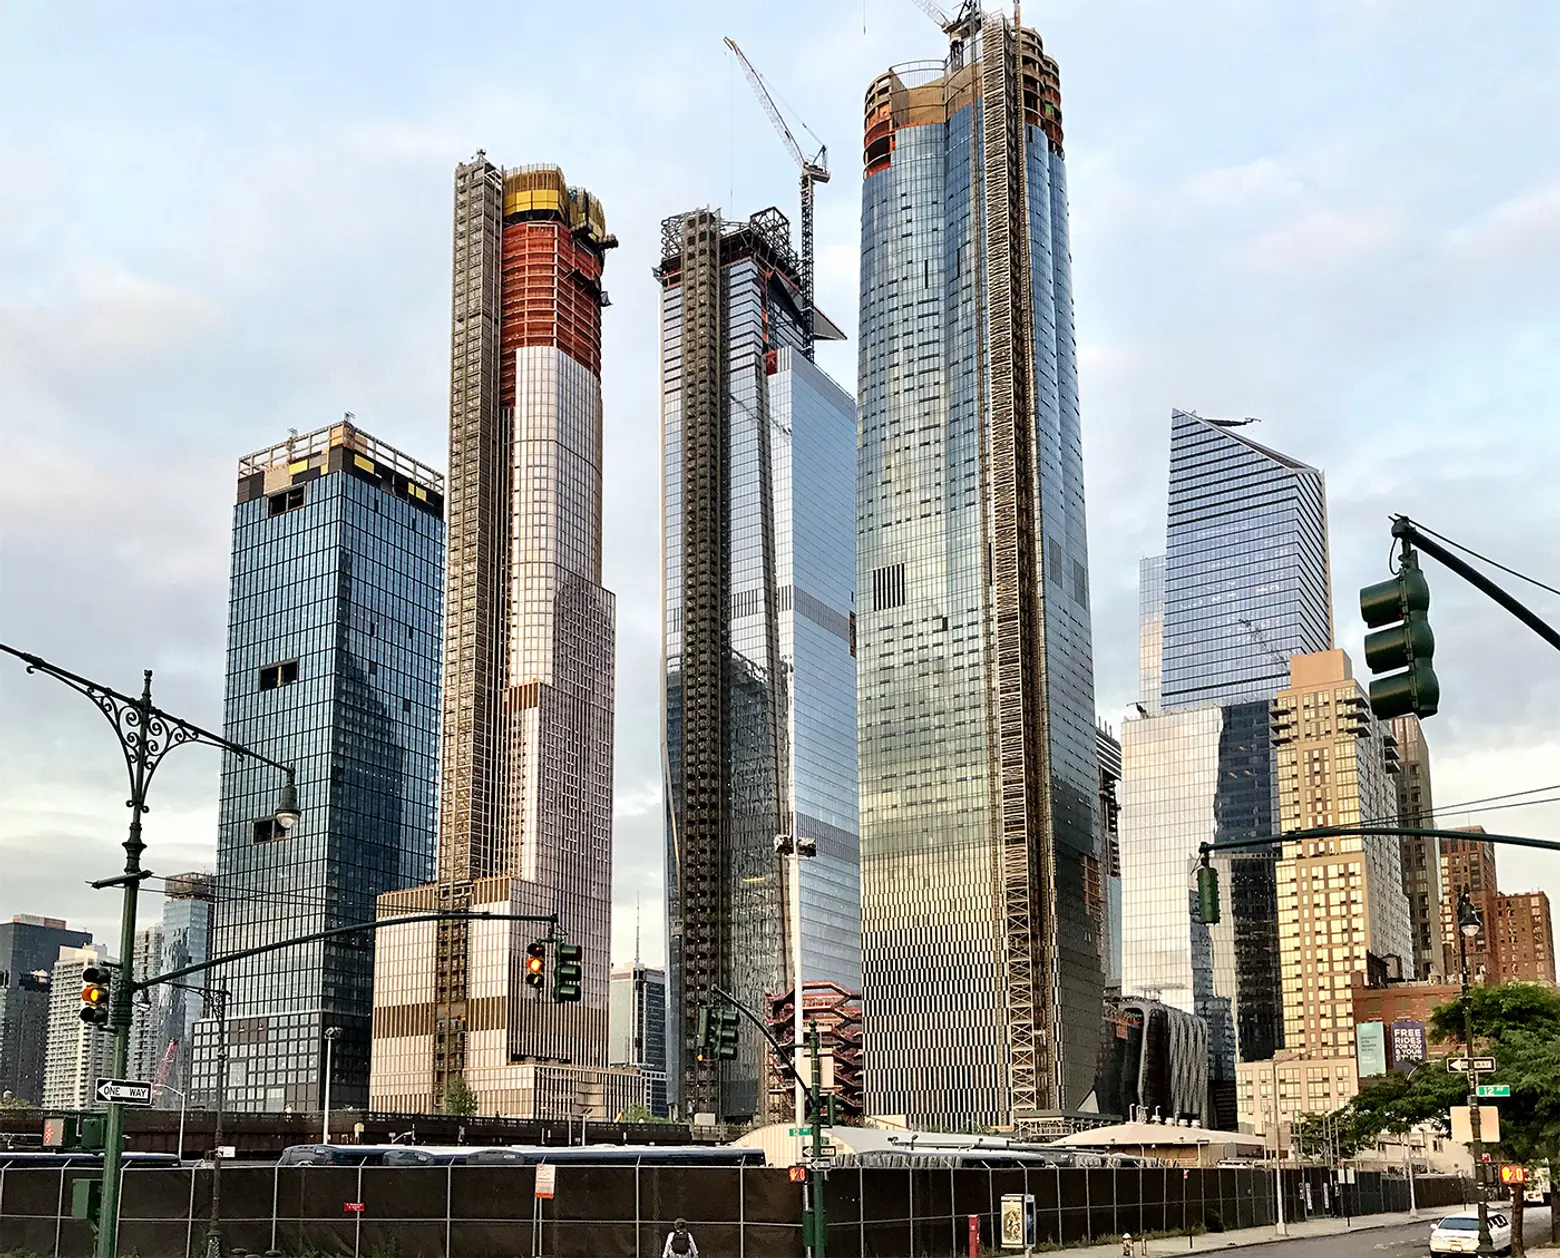 Reaching over 1,000 feet, 35 Hudson Yards tops out as the mega-project’s tallest residential building